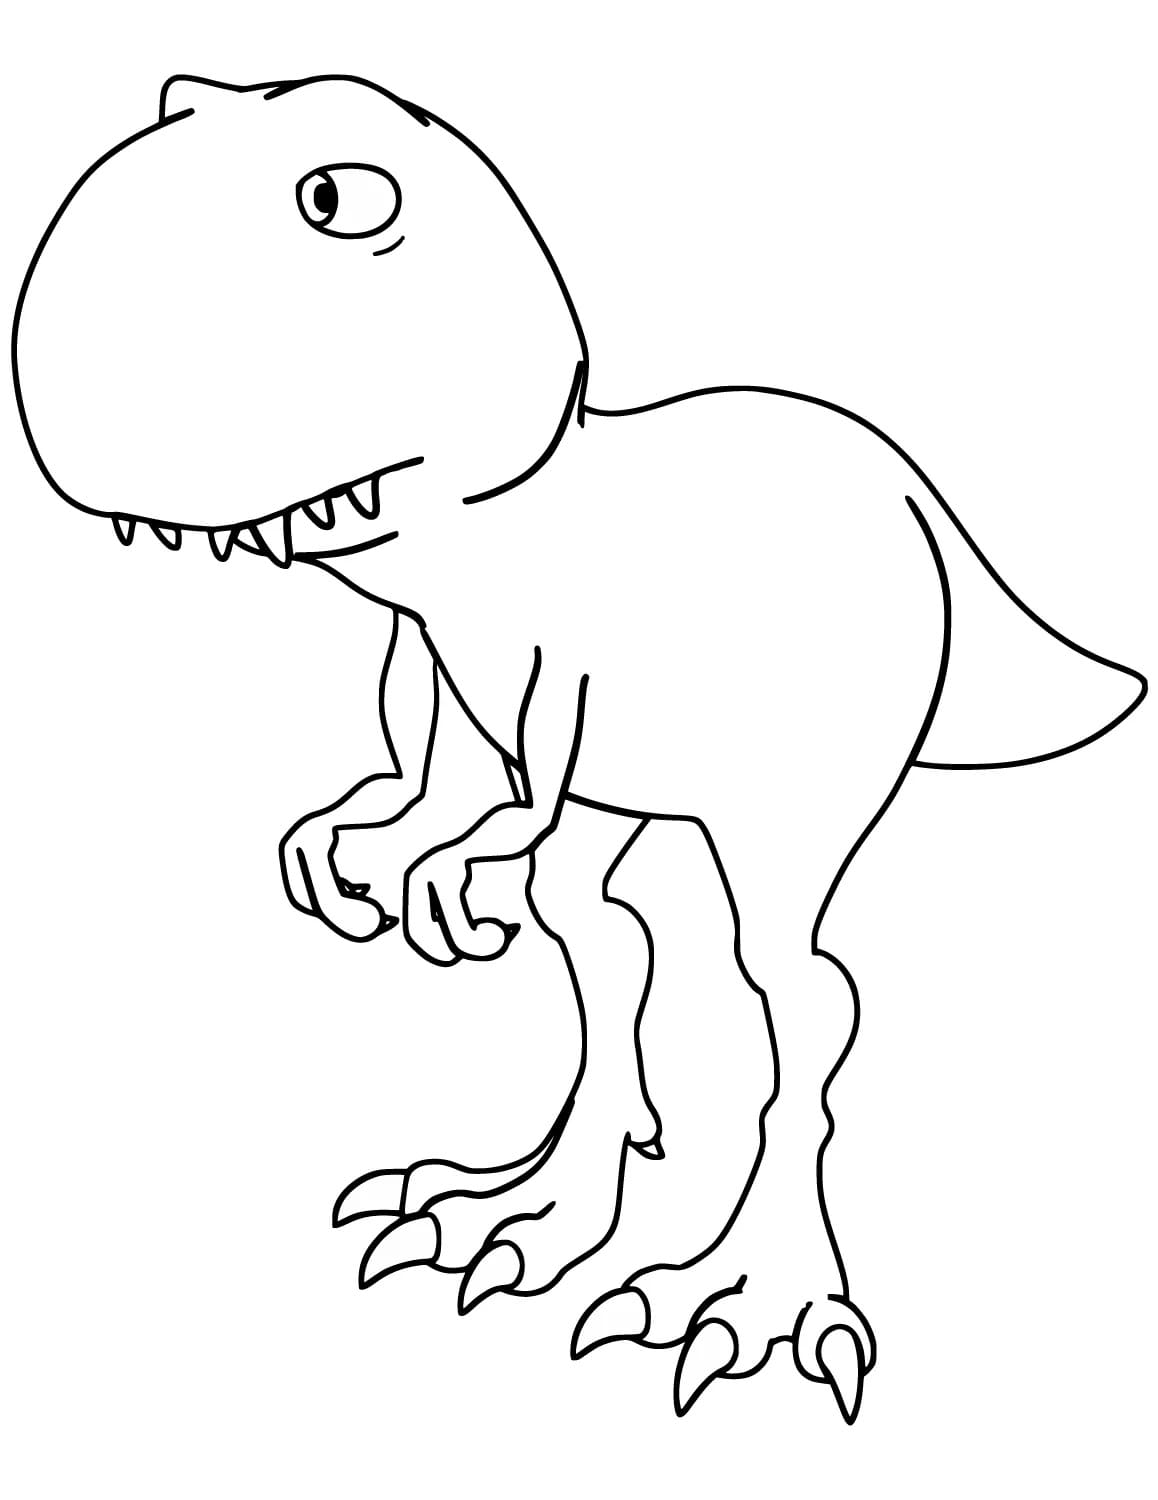 Coloring page T-rex Dinosaur T-Rex for boys 4-5 years old